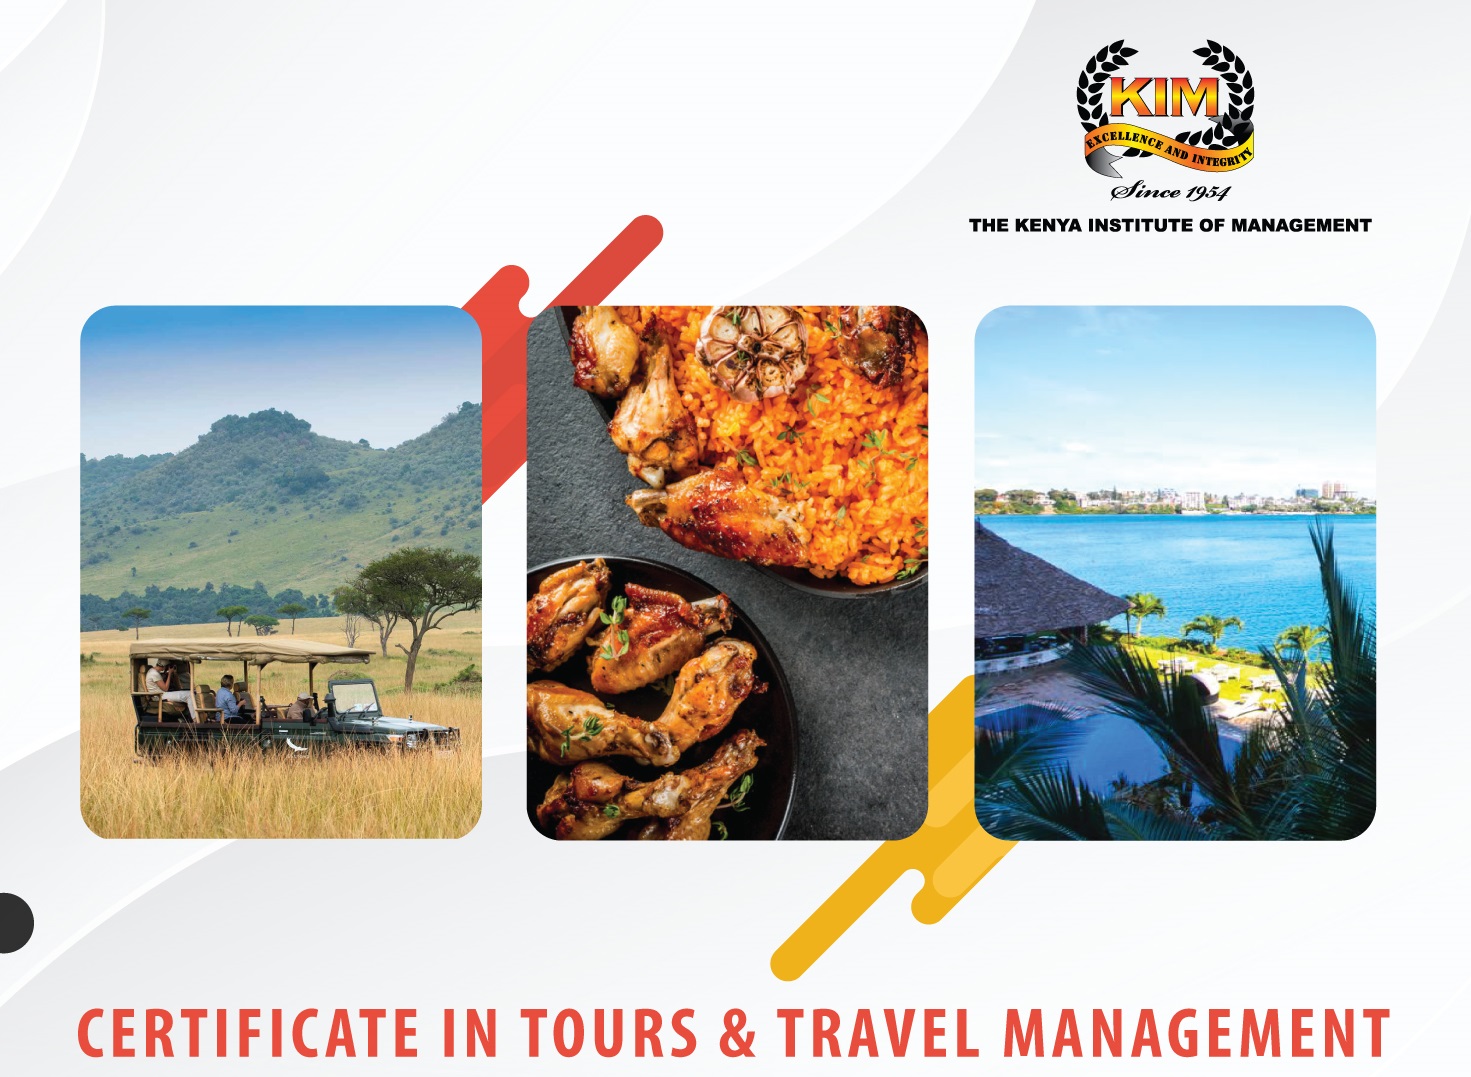 <p>This course is intended to equip the learner with key concepts and knowledge in Tours and Travel Management.</p><br><p><strong>Modules I & II</strong></p><p>12 months course</p><p>30,000 Kshs Per Module</p><p><strong>Admission Criteria</strong></p><p>- KCSE certificate</p><p>- Completion of KNQF Level 4</p><p>- A certificate of Experimental Learning issued by KNQA </p><br>